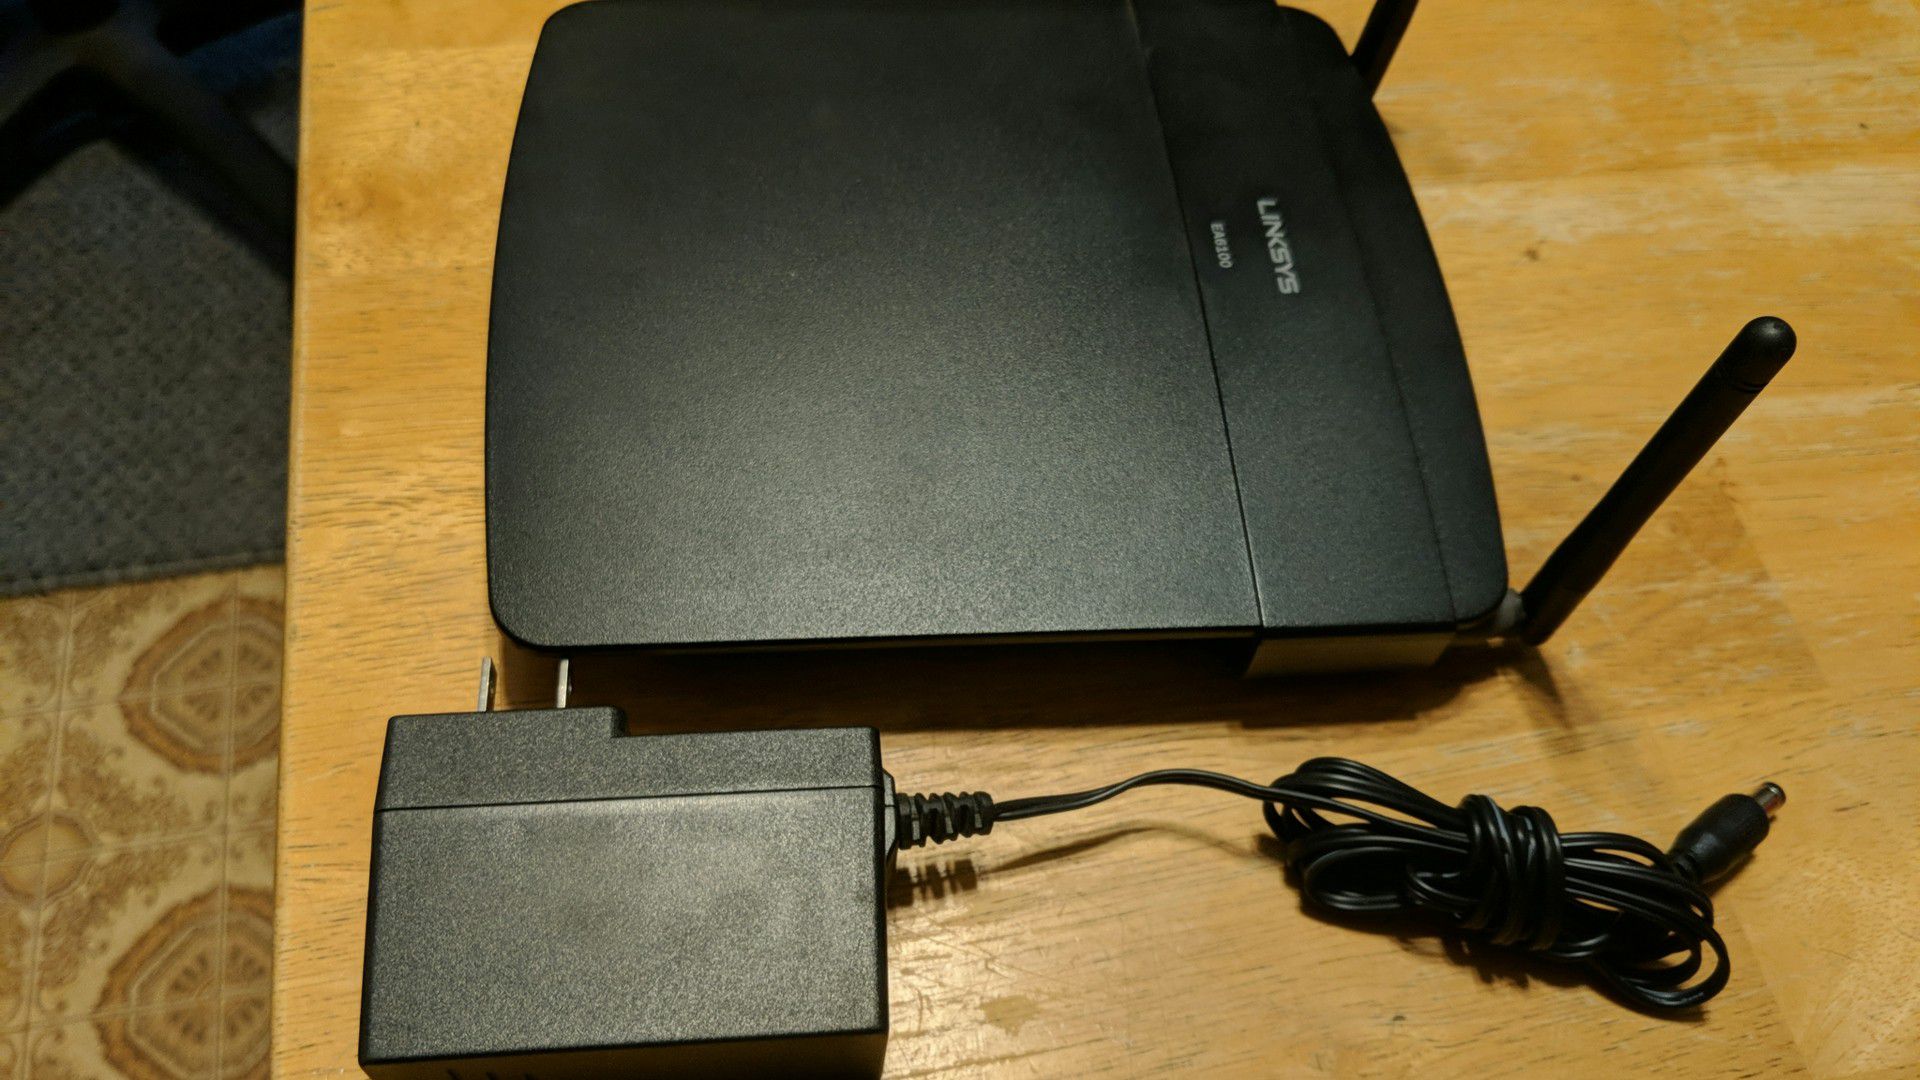 Linksys EA6100 router